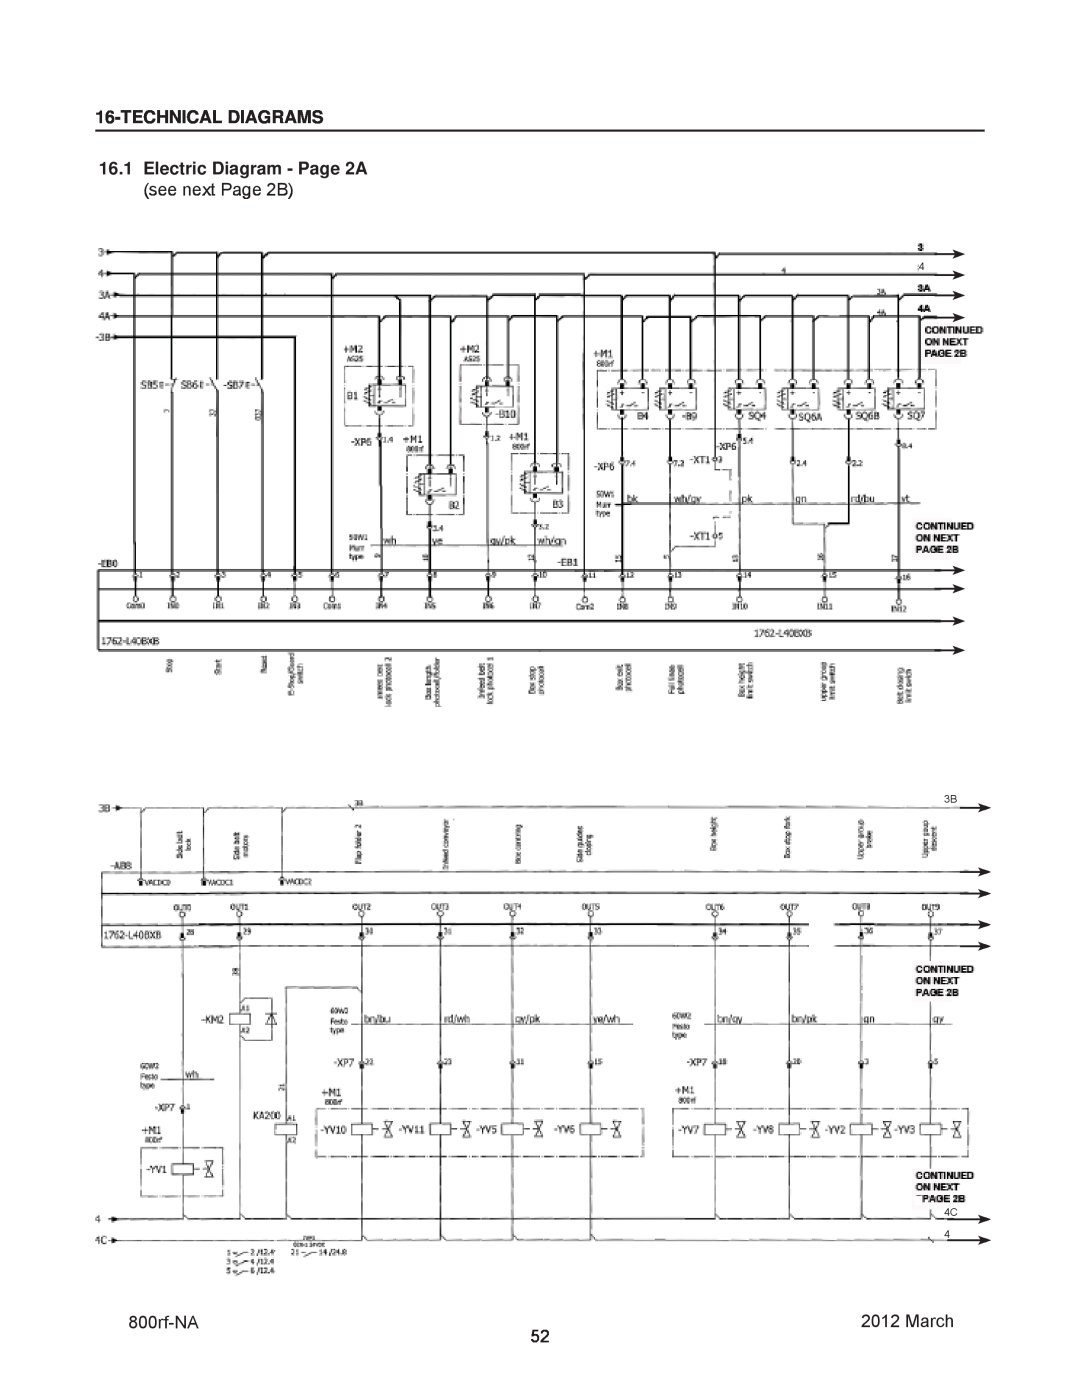 3M 40800, 800rf manual Technical Diagrams, Electric Diagram - Page 2A see next Page 2B, 3B 4C 